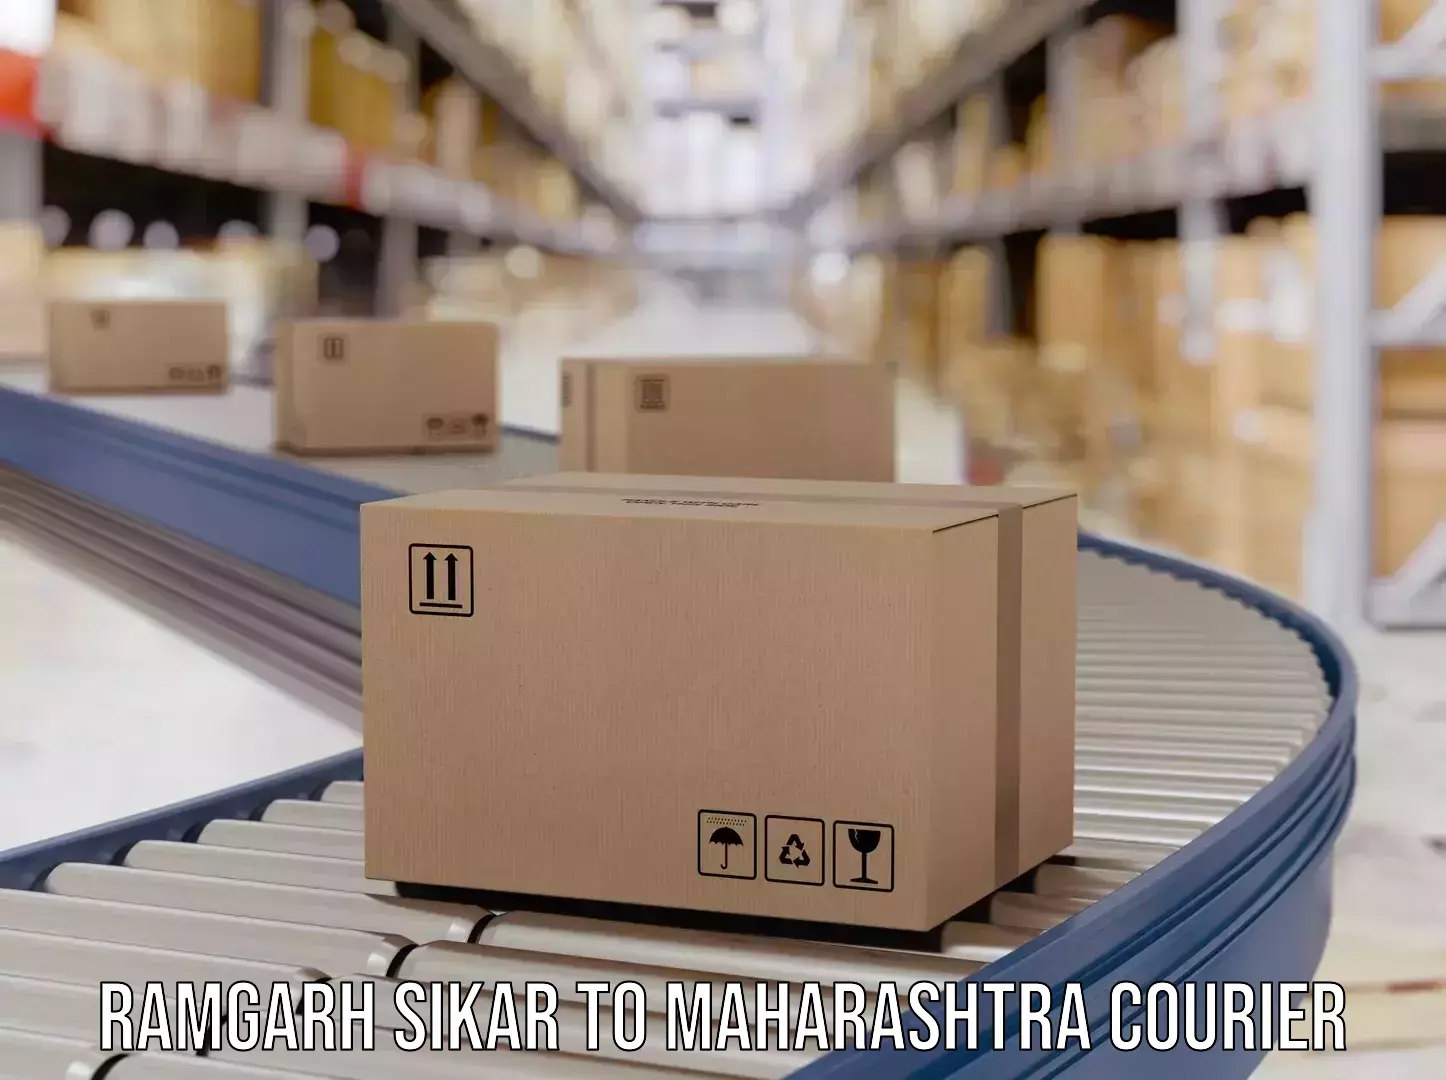 Comprehensive shipping network Ramgarh Sikar to Indapur